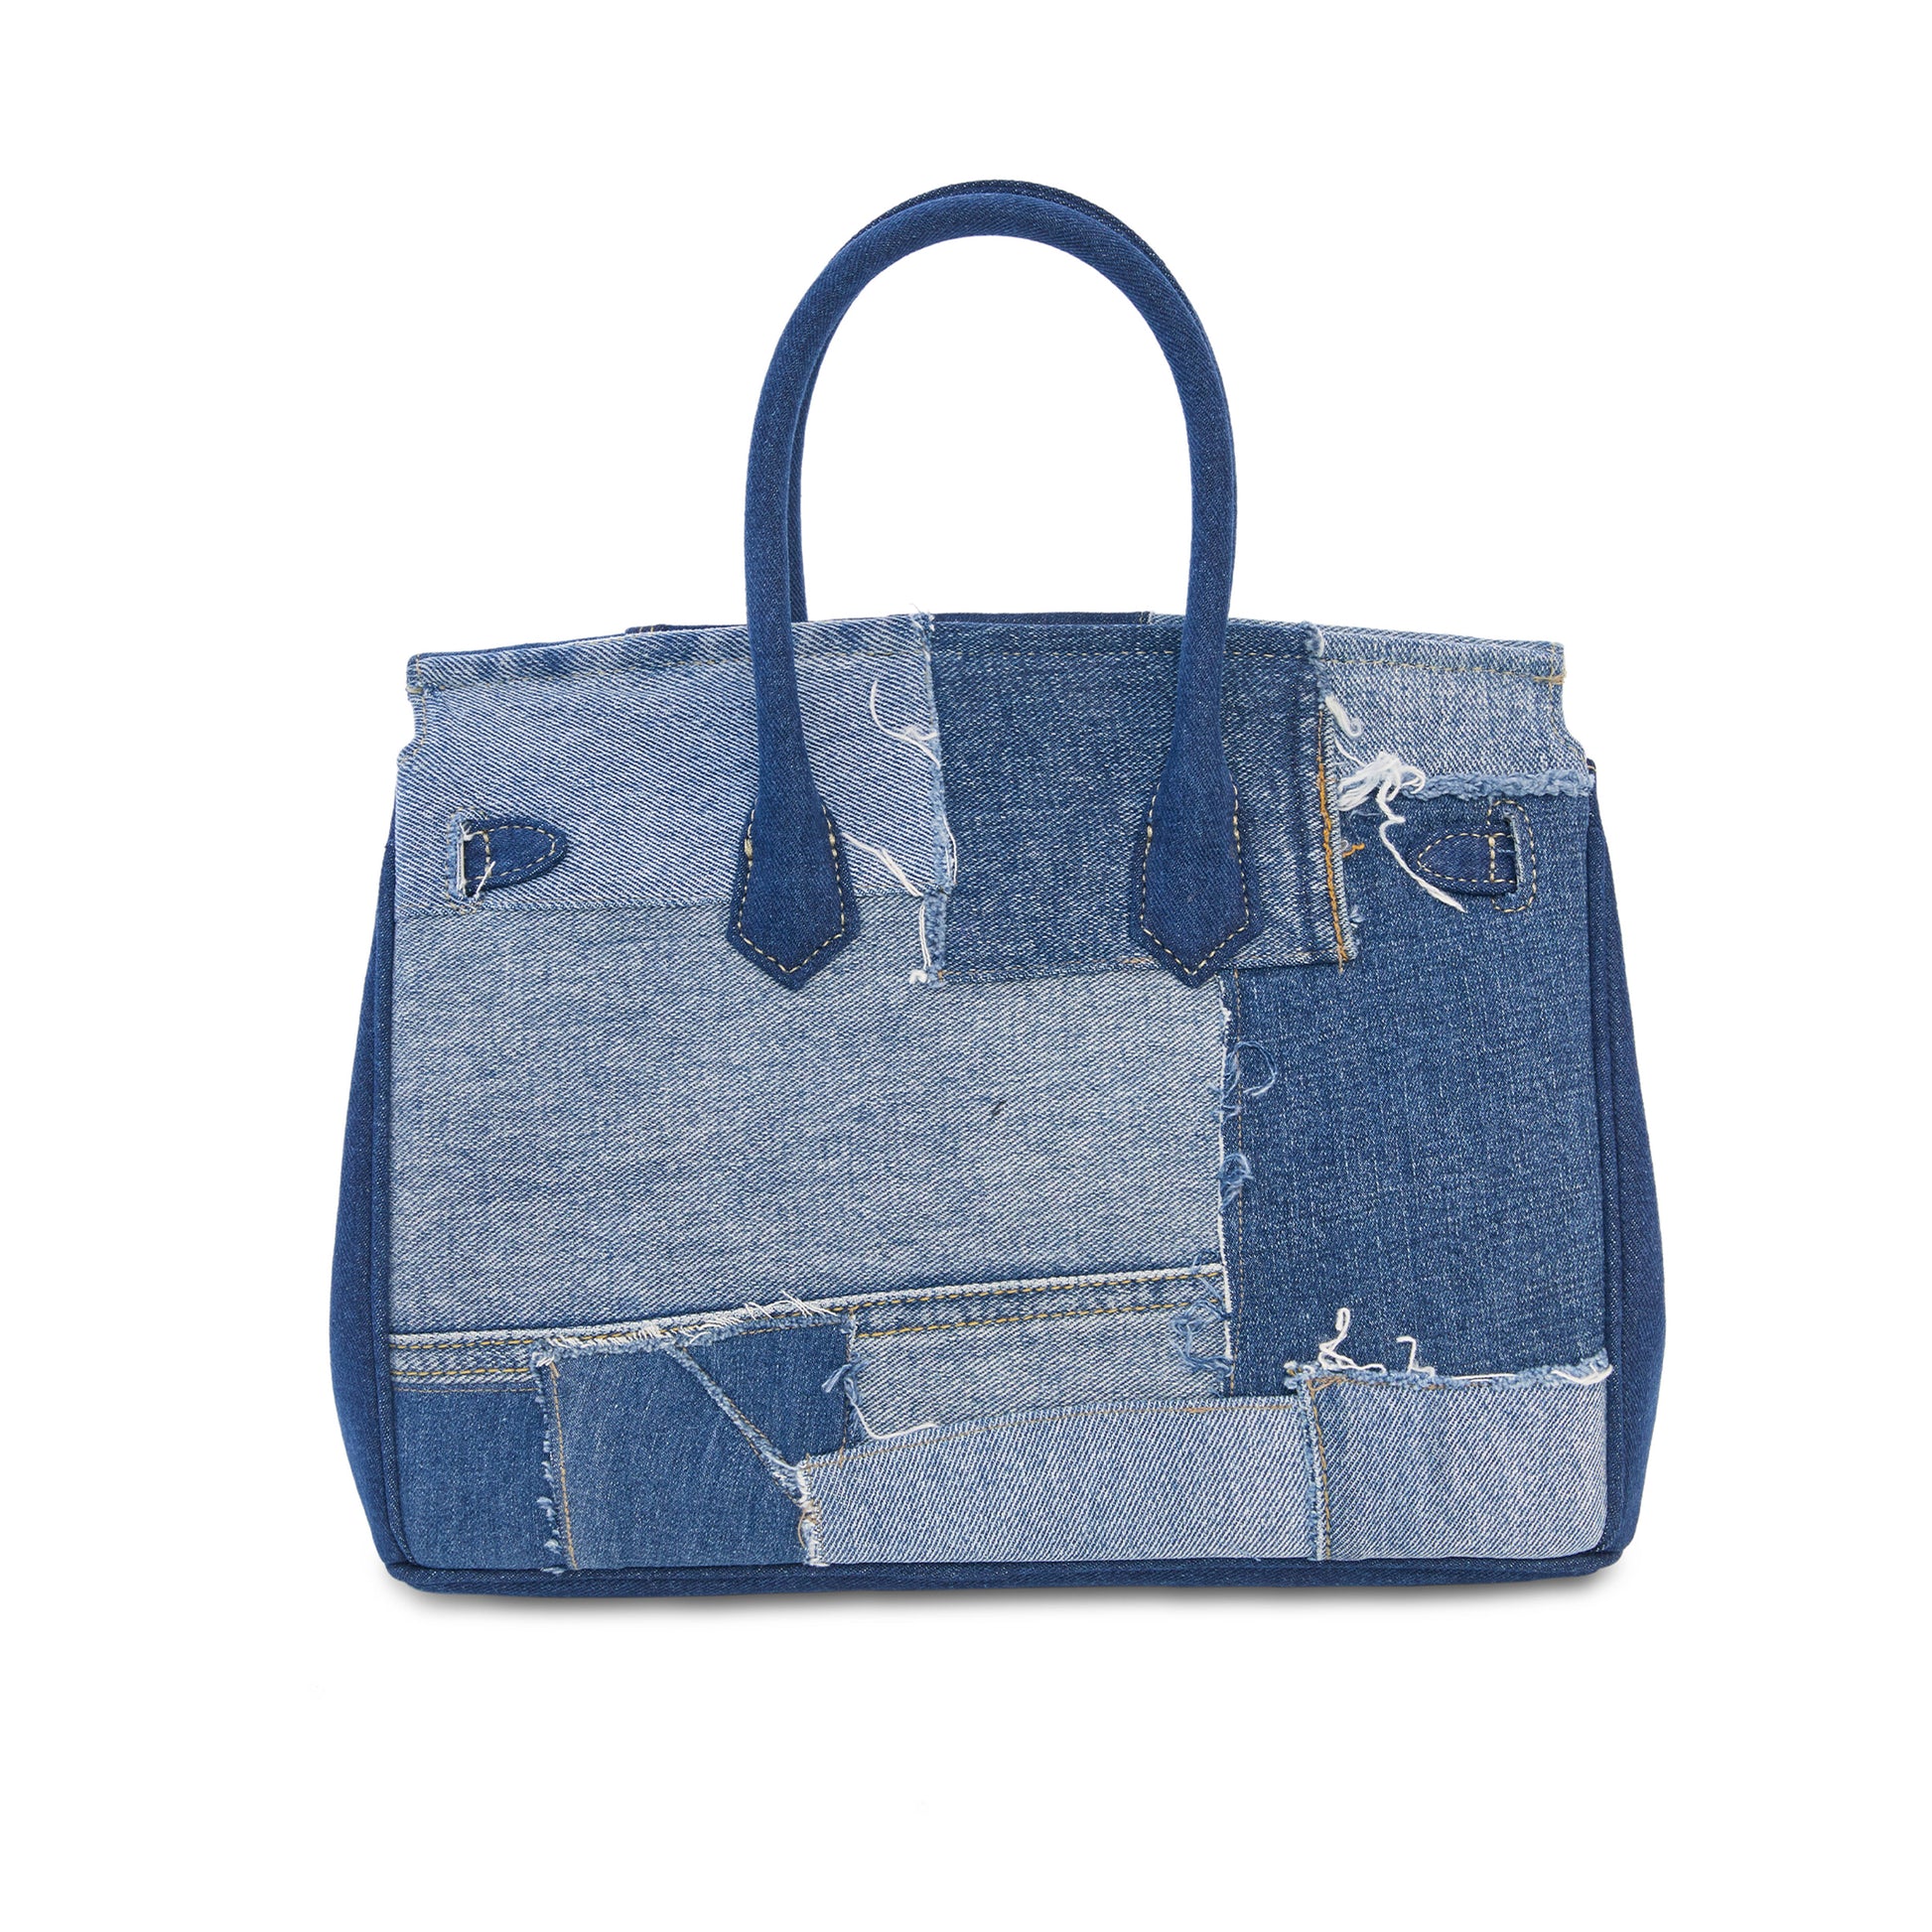 Weston Recycled Patchwork Denim and Leather Tote Bag Dark Brown